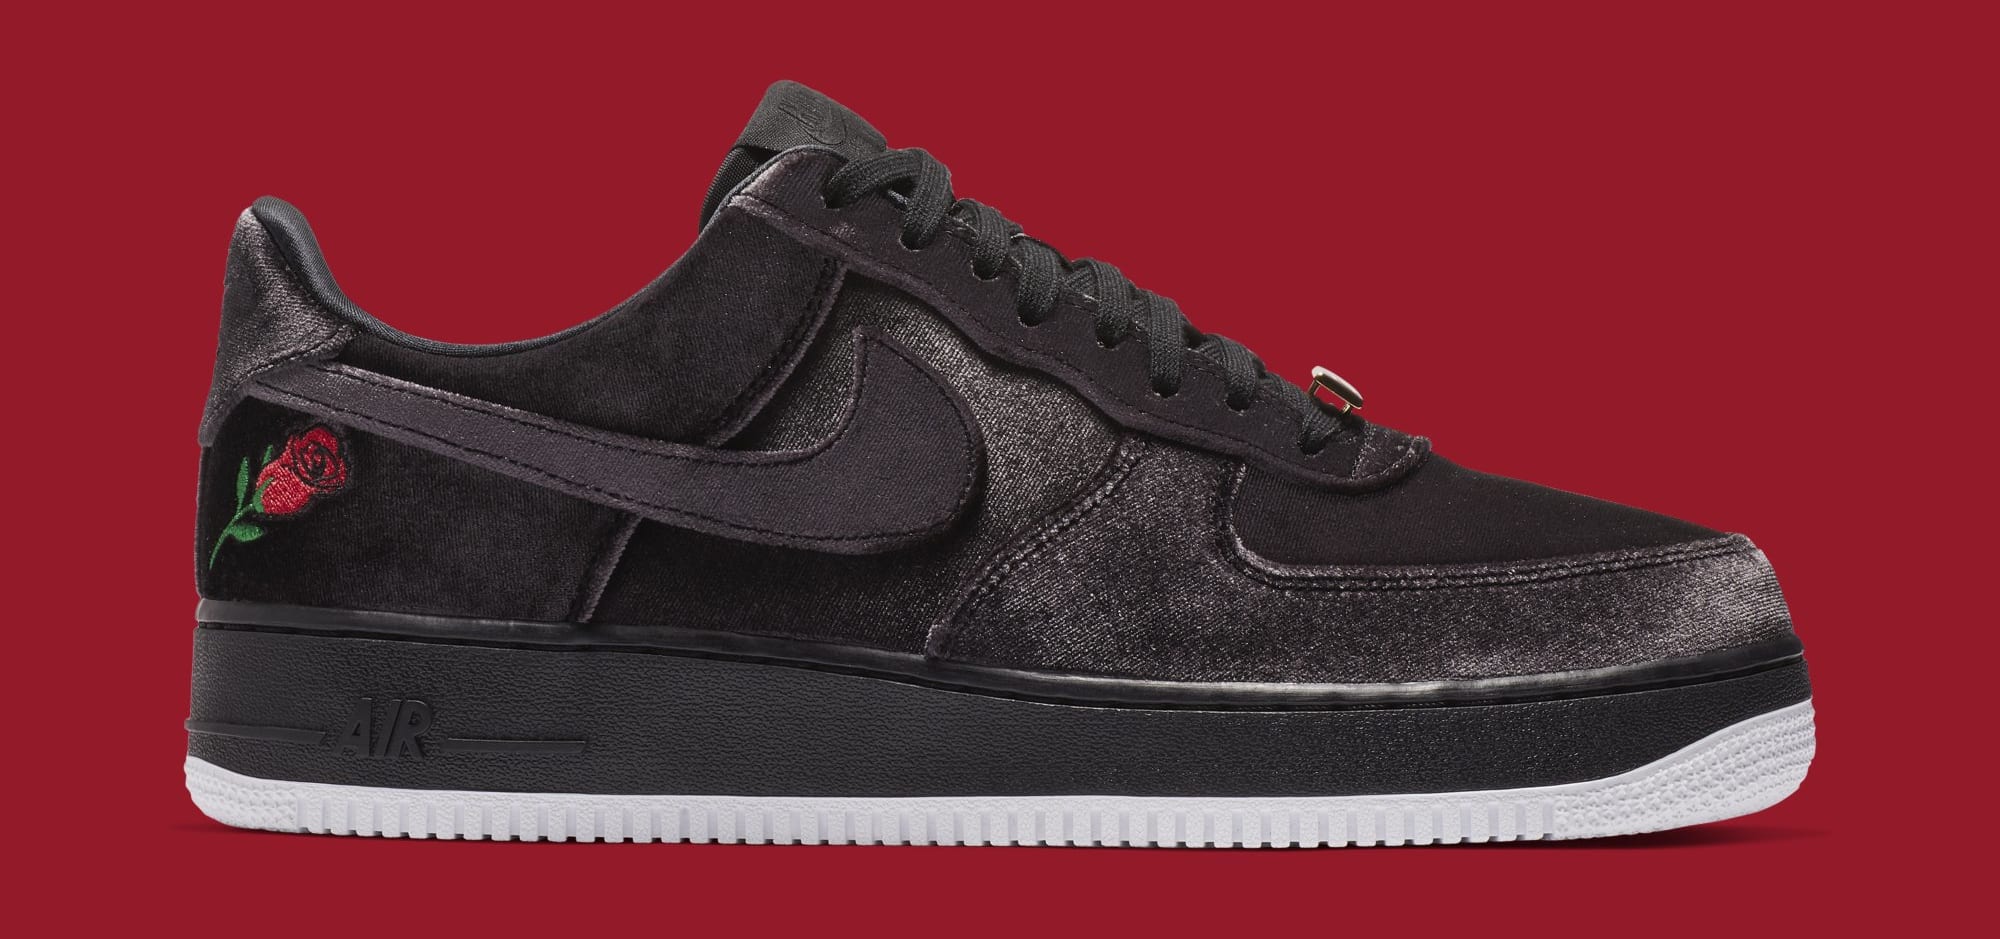 Nike Covers the Air Force 1 Low in Velvet | Complex